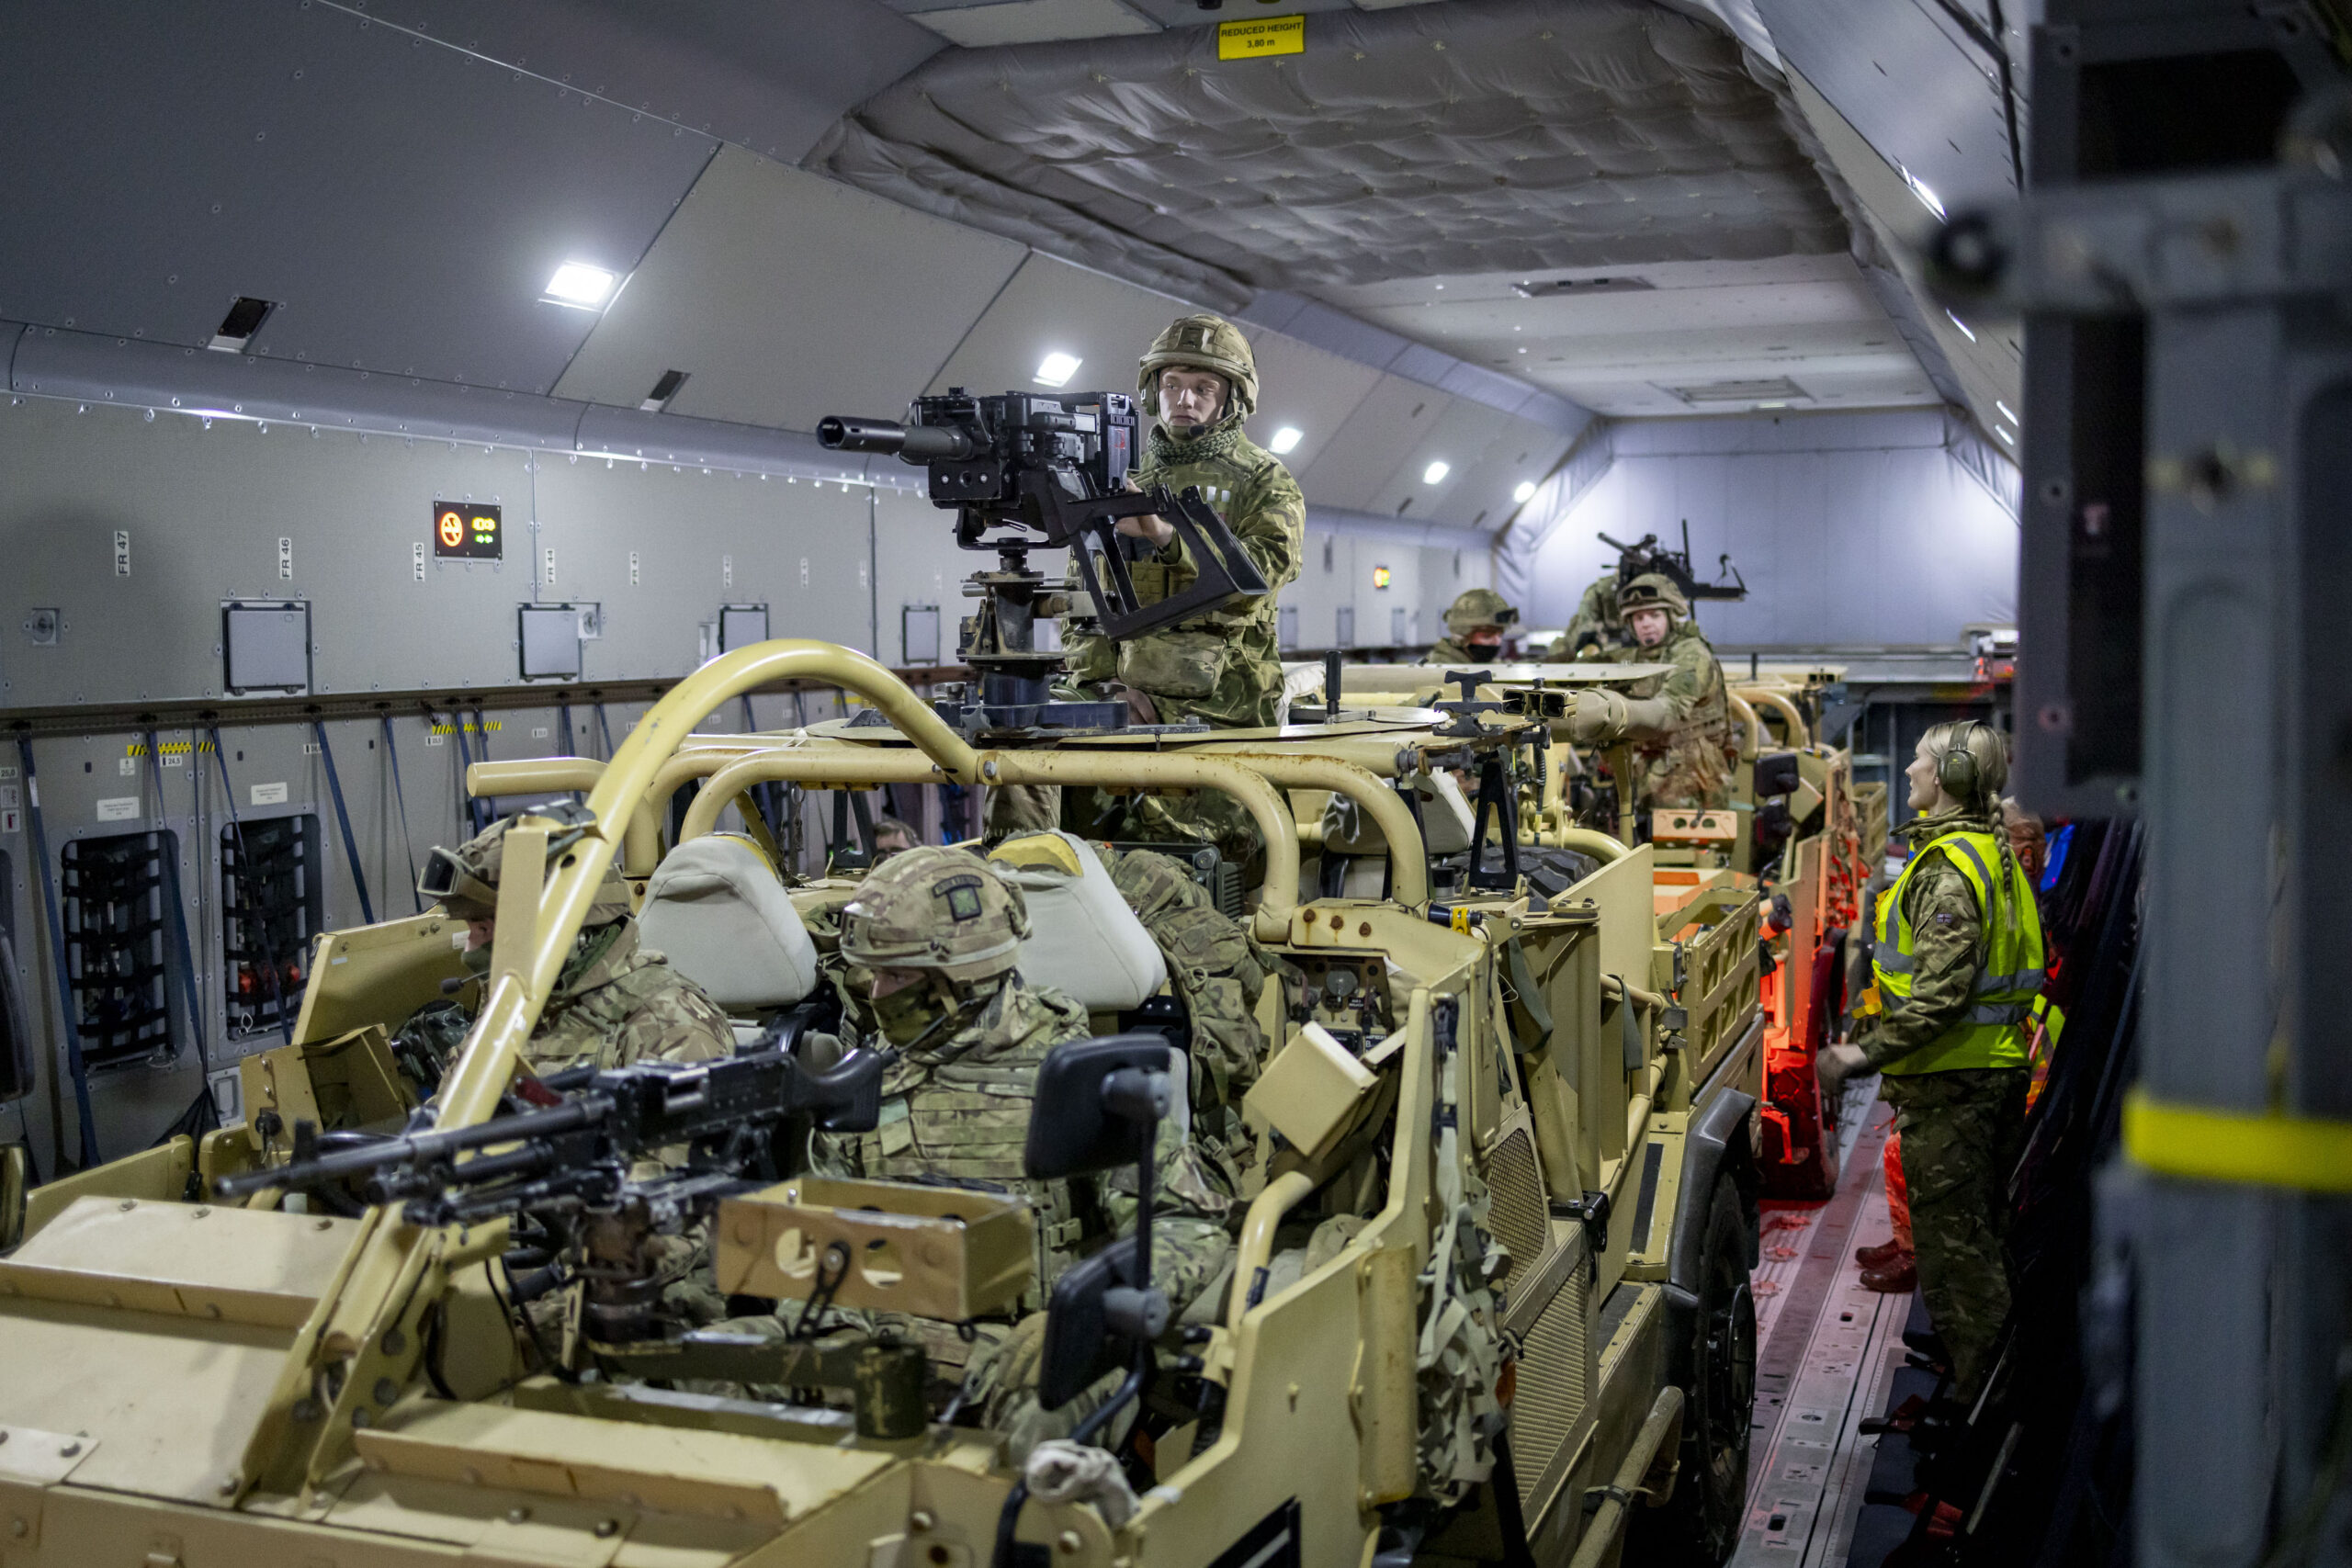 Jackal 2 Reconnaissance vehicles and their crew from the 1st Battalion, The Royal Irish Regiment, ready to drive off the Royal Air Force (RAF) ATLAS C.1 (A400M) aircraft after a Rapid Air Landing (RAL) at RAF Shawbury on Exercise Pegasus Clover on the 12th of December 2023.1st Battalion The Royal Irish Regiment (1 R IRISH) worked with an RAF ATLAS C.1 aircraft at RAF Shawbury to develop their airlanding skills. Troops loaded and secured Land rovers on the aircraft, and then took flight to practise getting off the aircraft and into the fight as fast as possible. The skills learnt on Exercise Pegasus Clover are vital for the unit in its role in 16 Air Assault Brigade, the British Army’s global response force. The brigade is trained and equipped to be ready to deploy by air at short notice to respond to international crises, from evacuations to warfighting. 1 R IRISH, based at Clive Barracks in Tern Hill, serves in 16 Air Asslt Bde as light recce strike infantry, a new concept that the unit is currently developing. The intent is to provide a highly mobile force that can seek out battle winning information, while having the firepower to hit the enemy hard. It has the flexibility to deploy onto operations by airlanding or driving, as well as conducting helicopter operations.